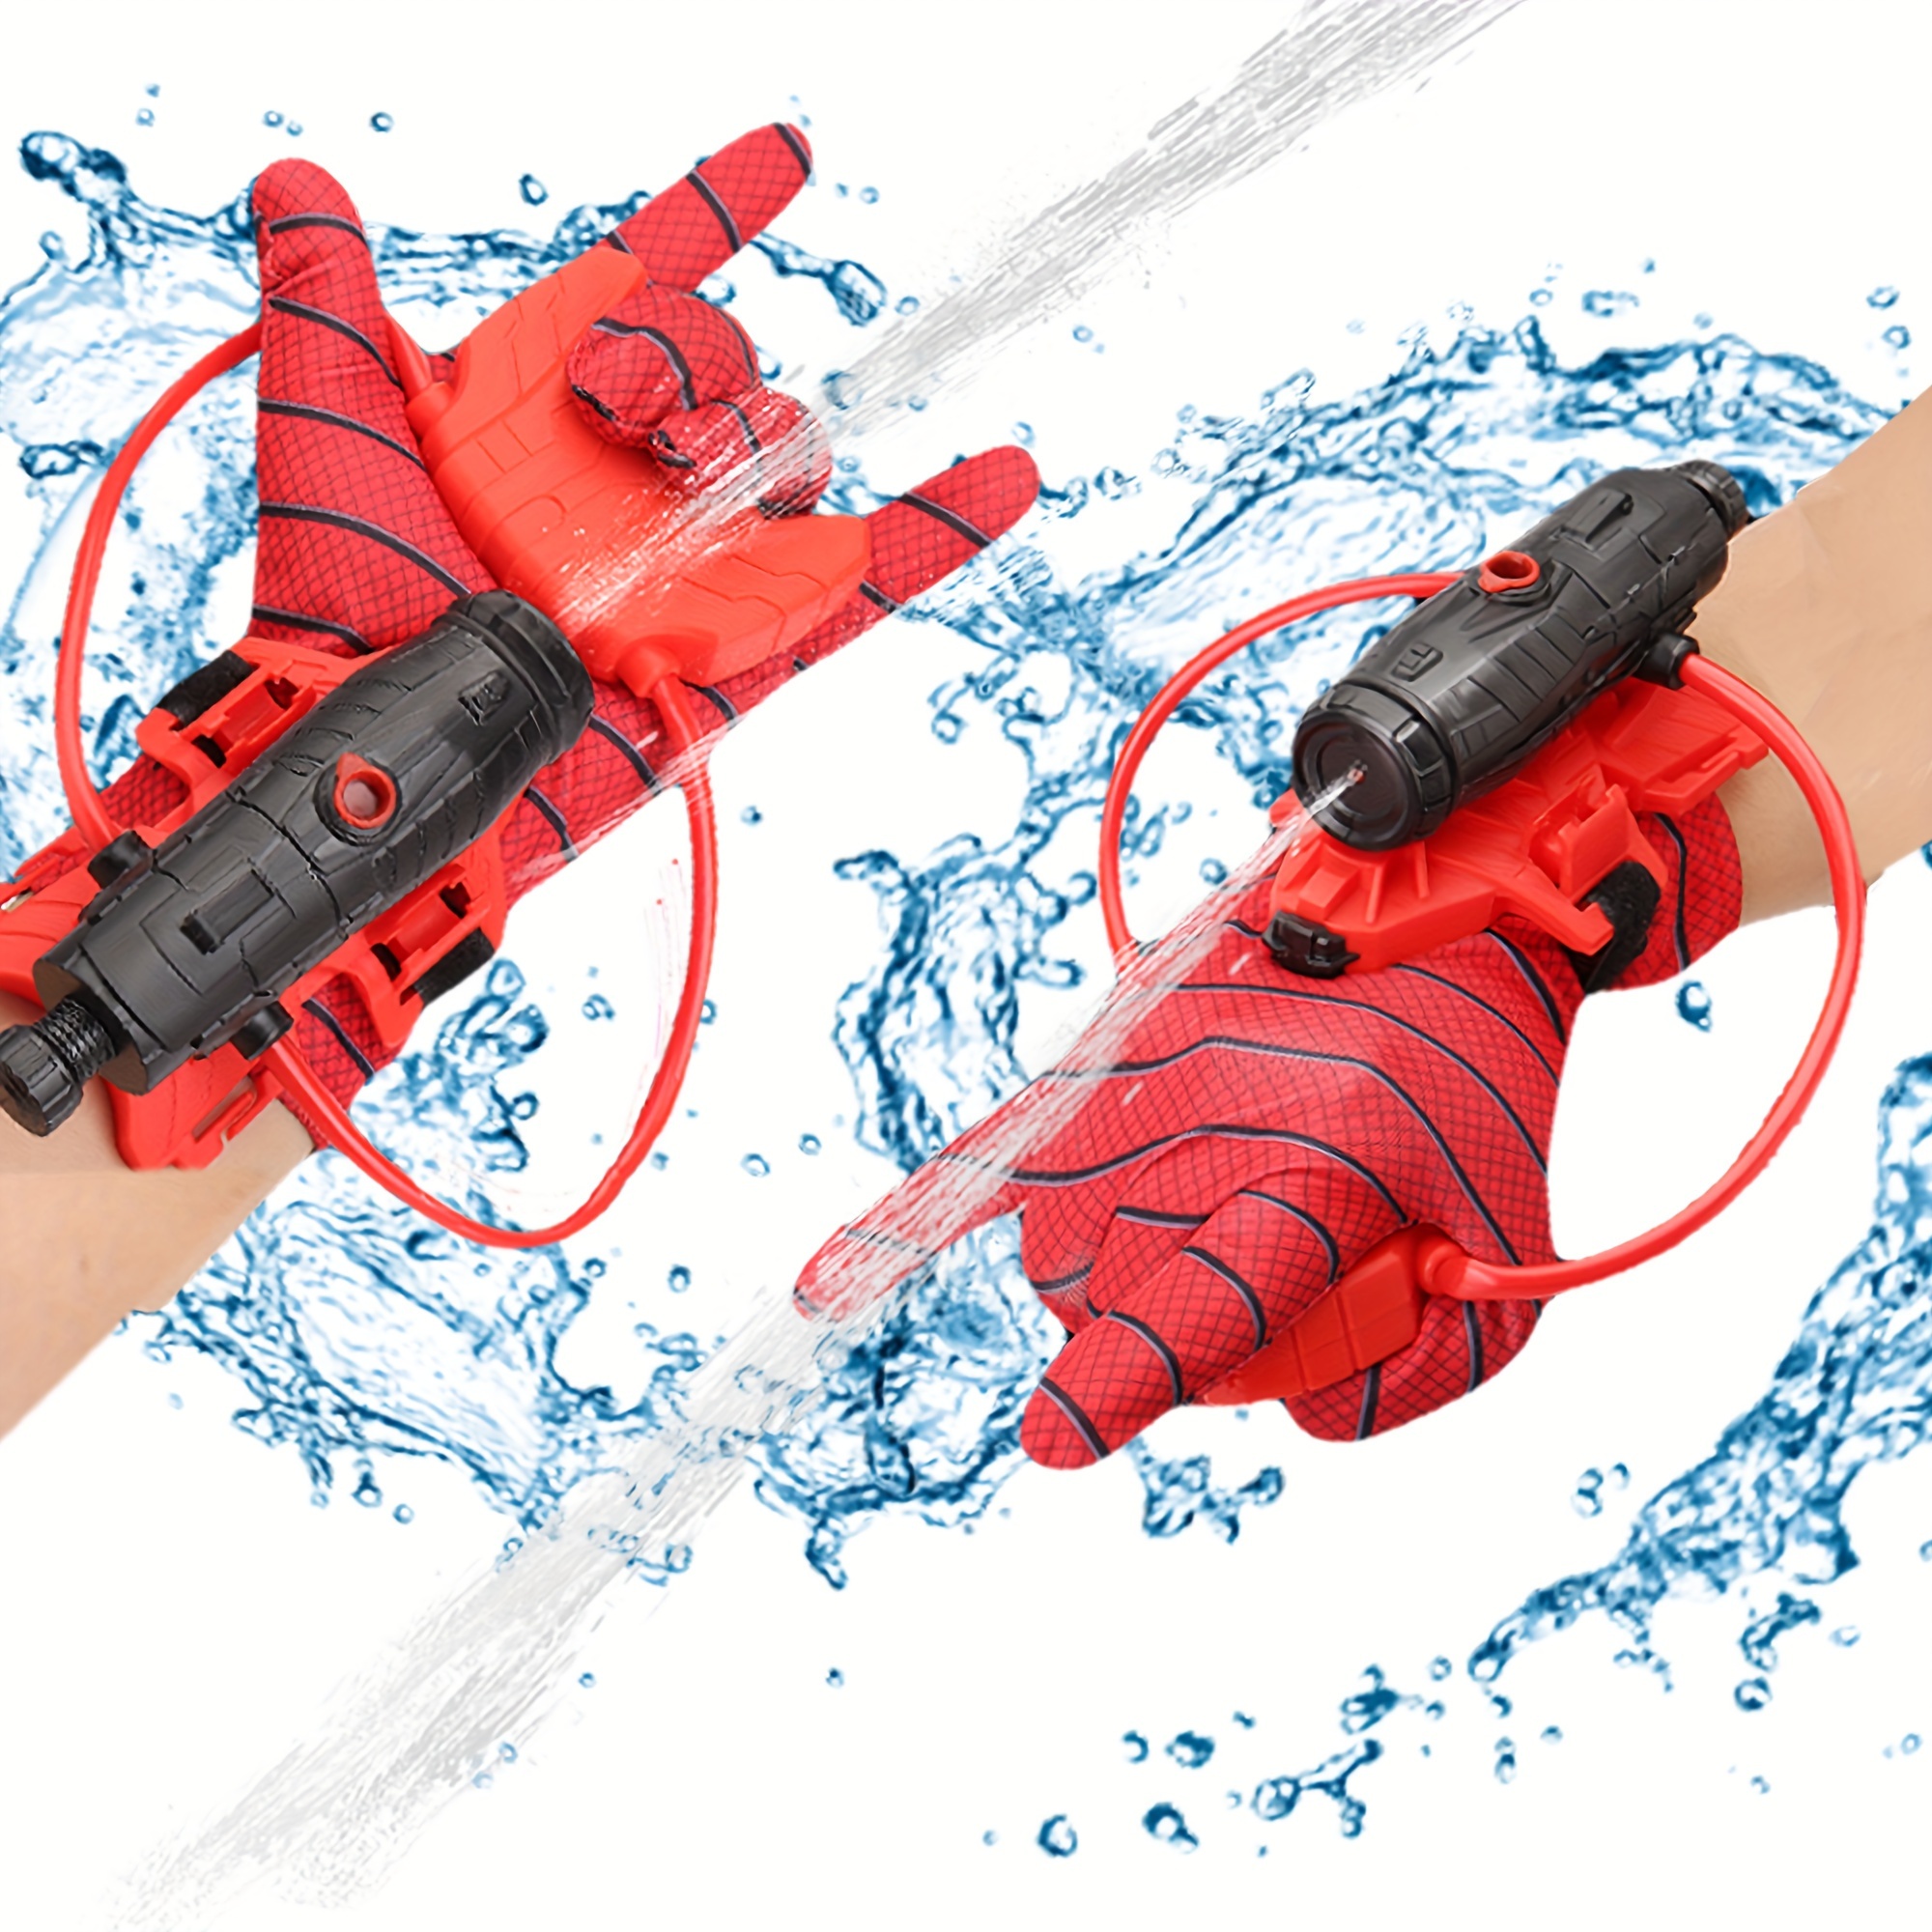 

2 Sets Spider Web Shooters Toy Water Wrist Launcher With Glove, Hero Wrist Water Blaster Sprayer Set, Water Pistol, Cosplay Spider Shooters Game, Christmas Gift Christmas Gift